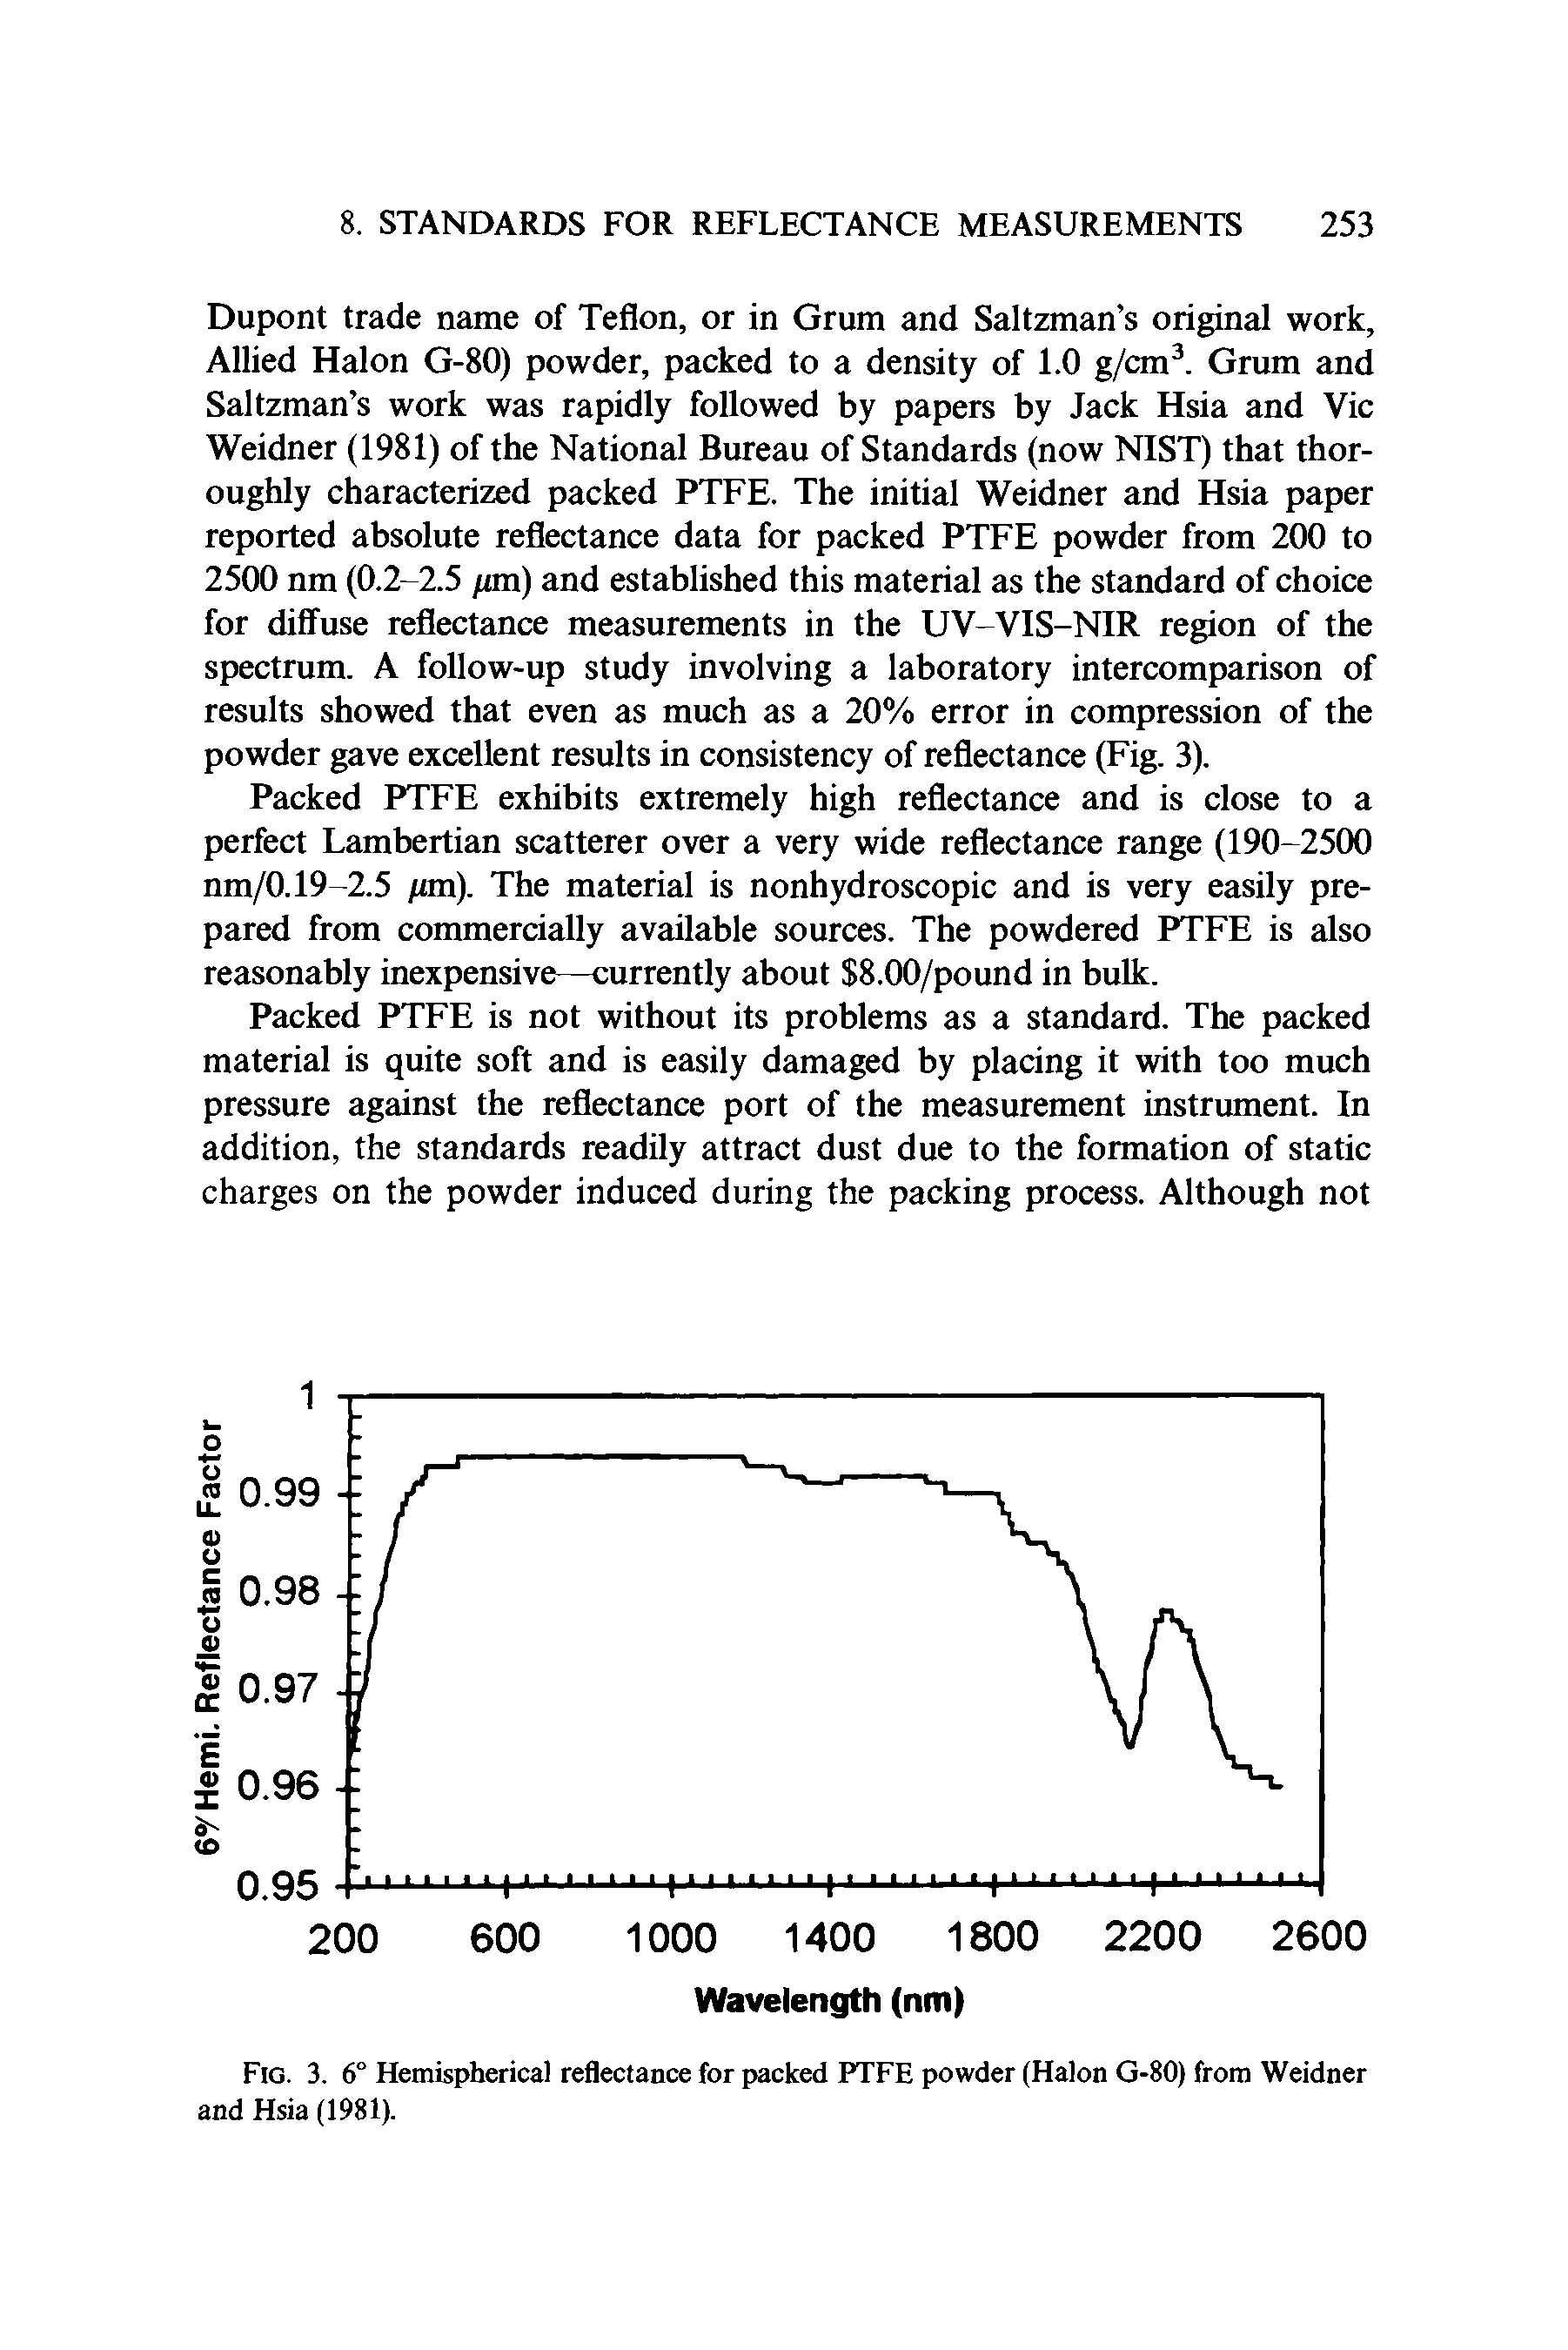 Fig. 3. 6° Hemispherical reflectance for packed PTFE powder (Halon G-80) from Weidner and Hsia (1981).